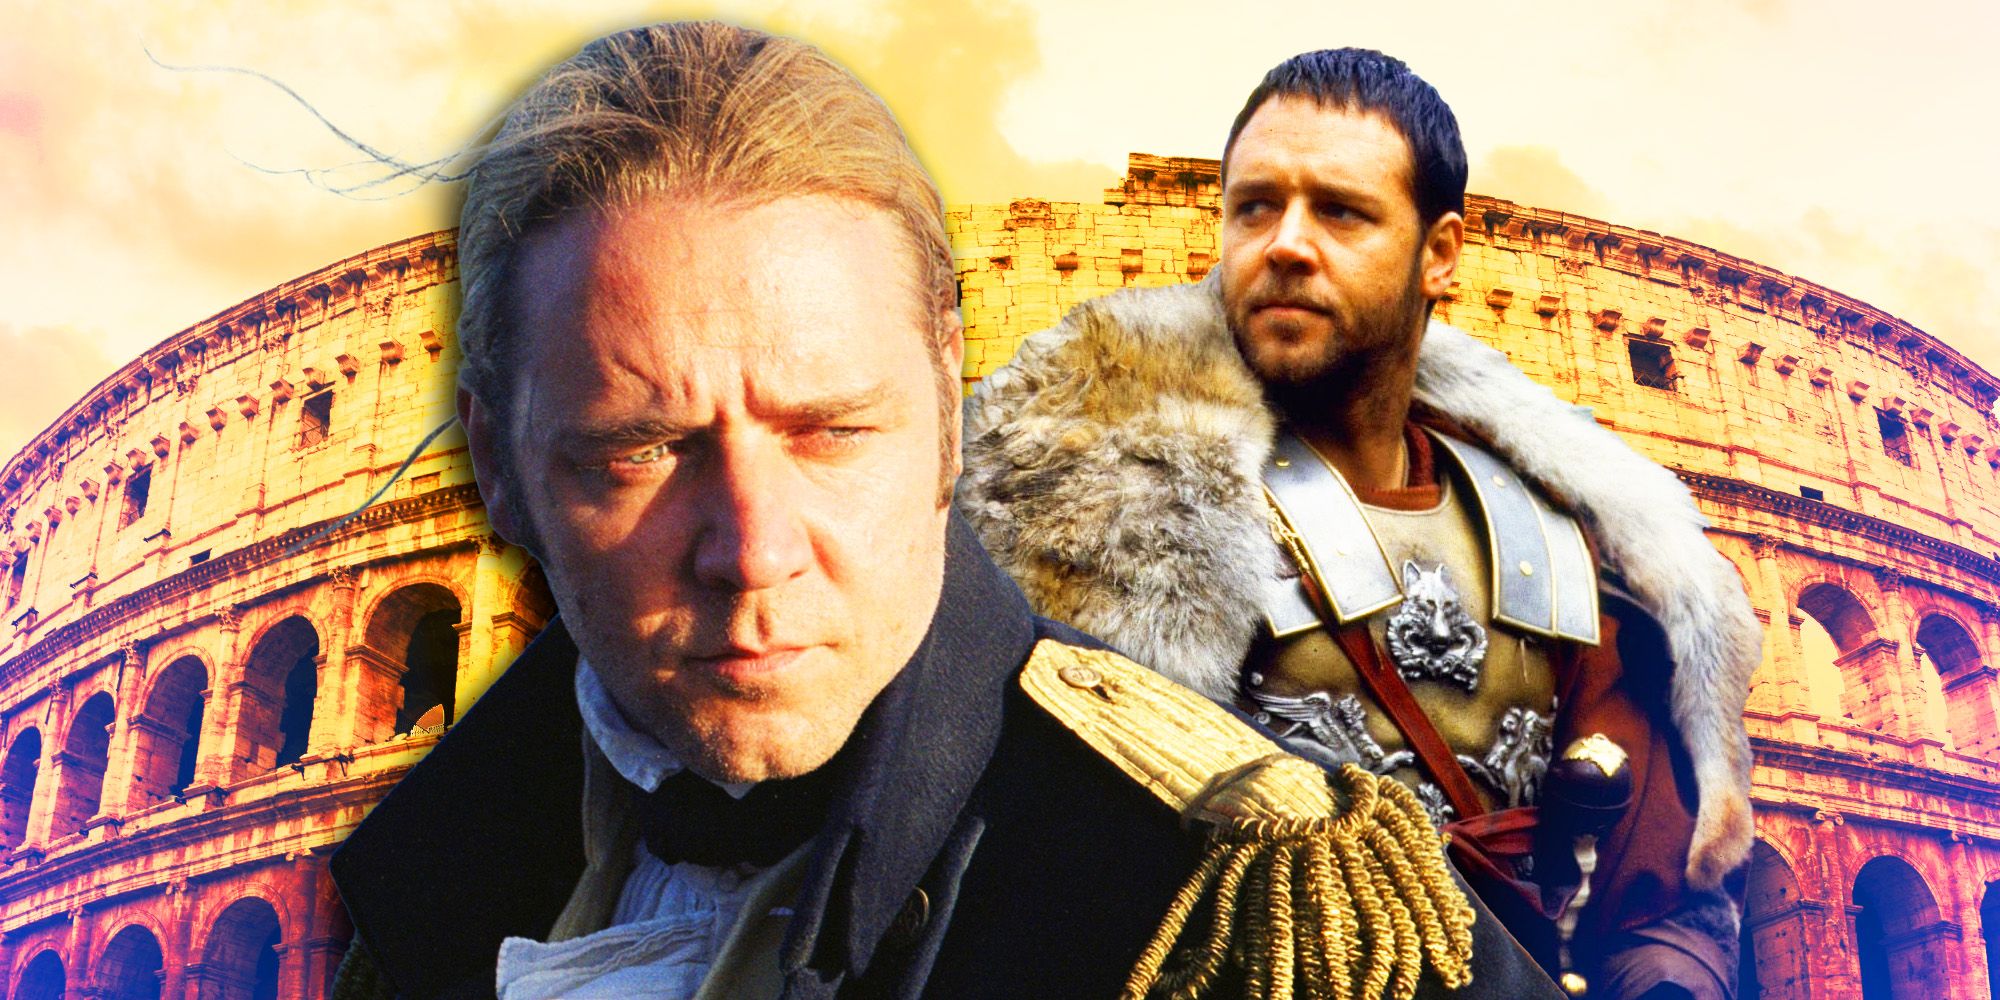 Russell Crowe in Gladiator and Master and Commander